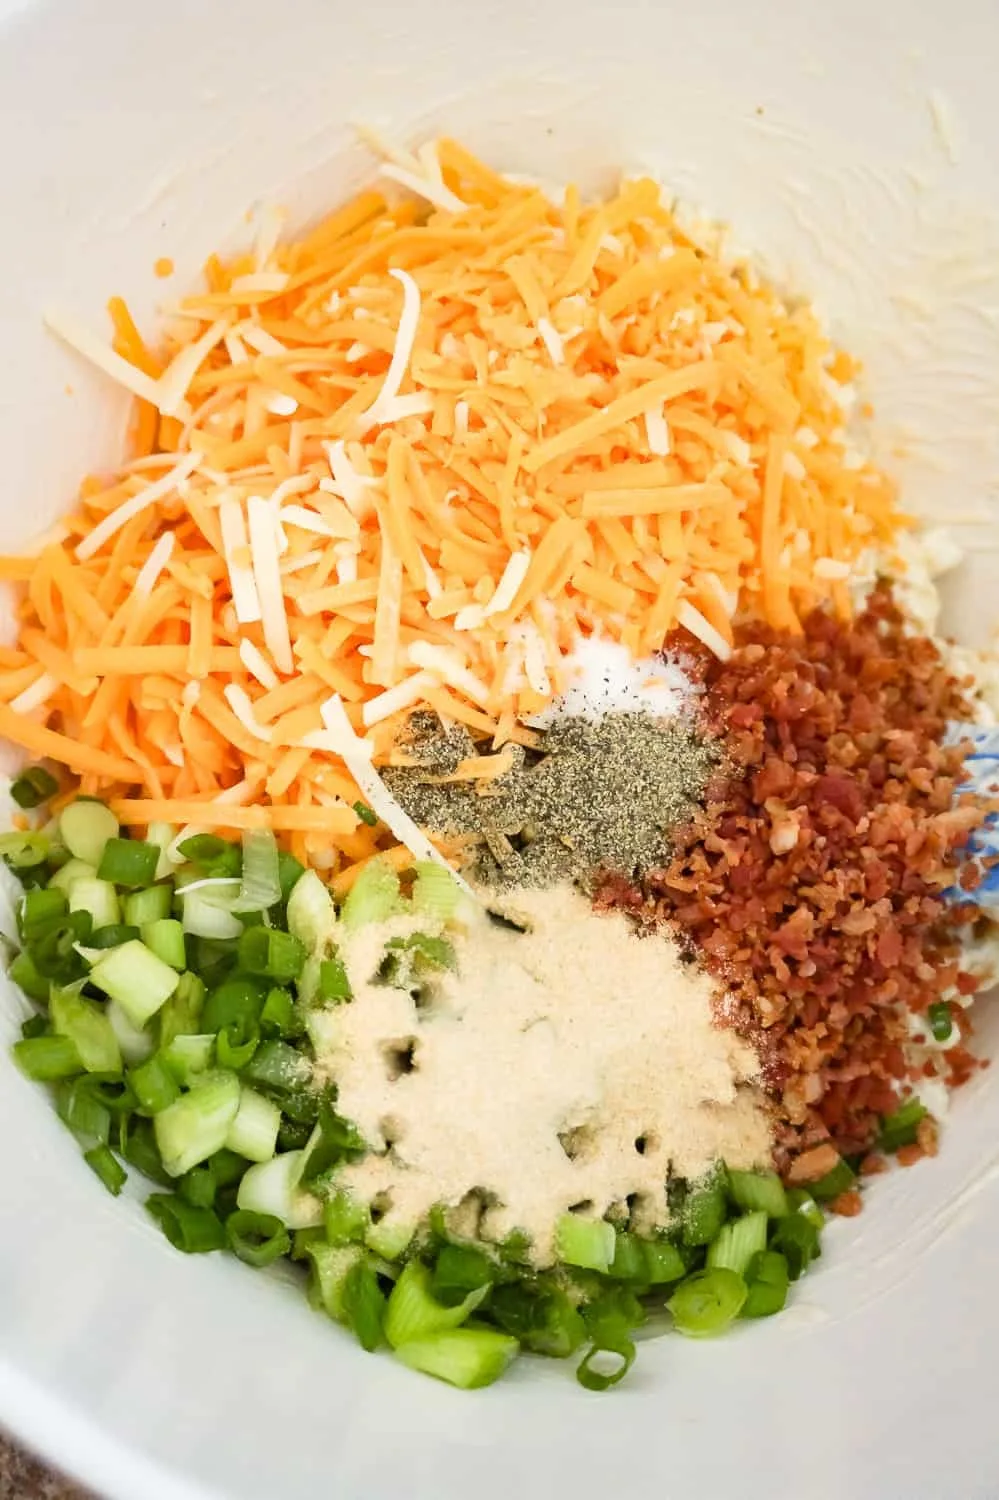 shredded cheddar cheese, chopped green onions, bacon bits and spices in a mixing bowl